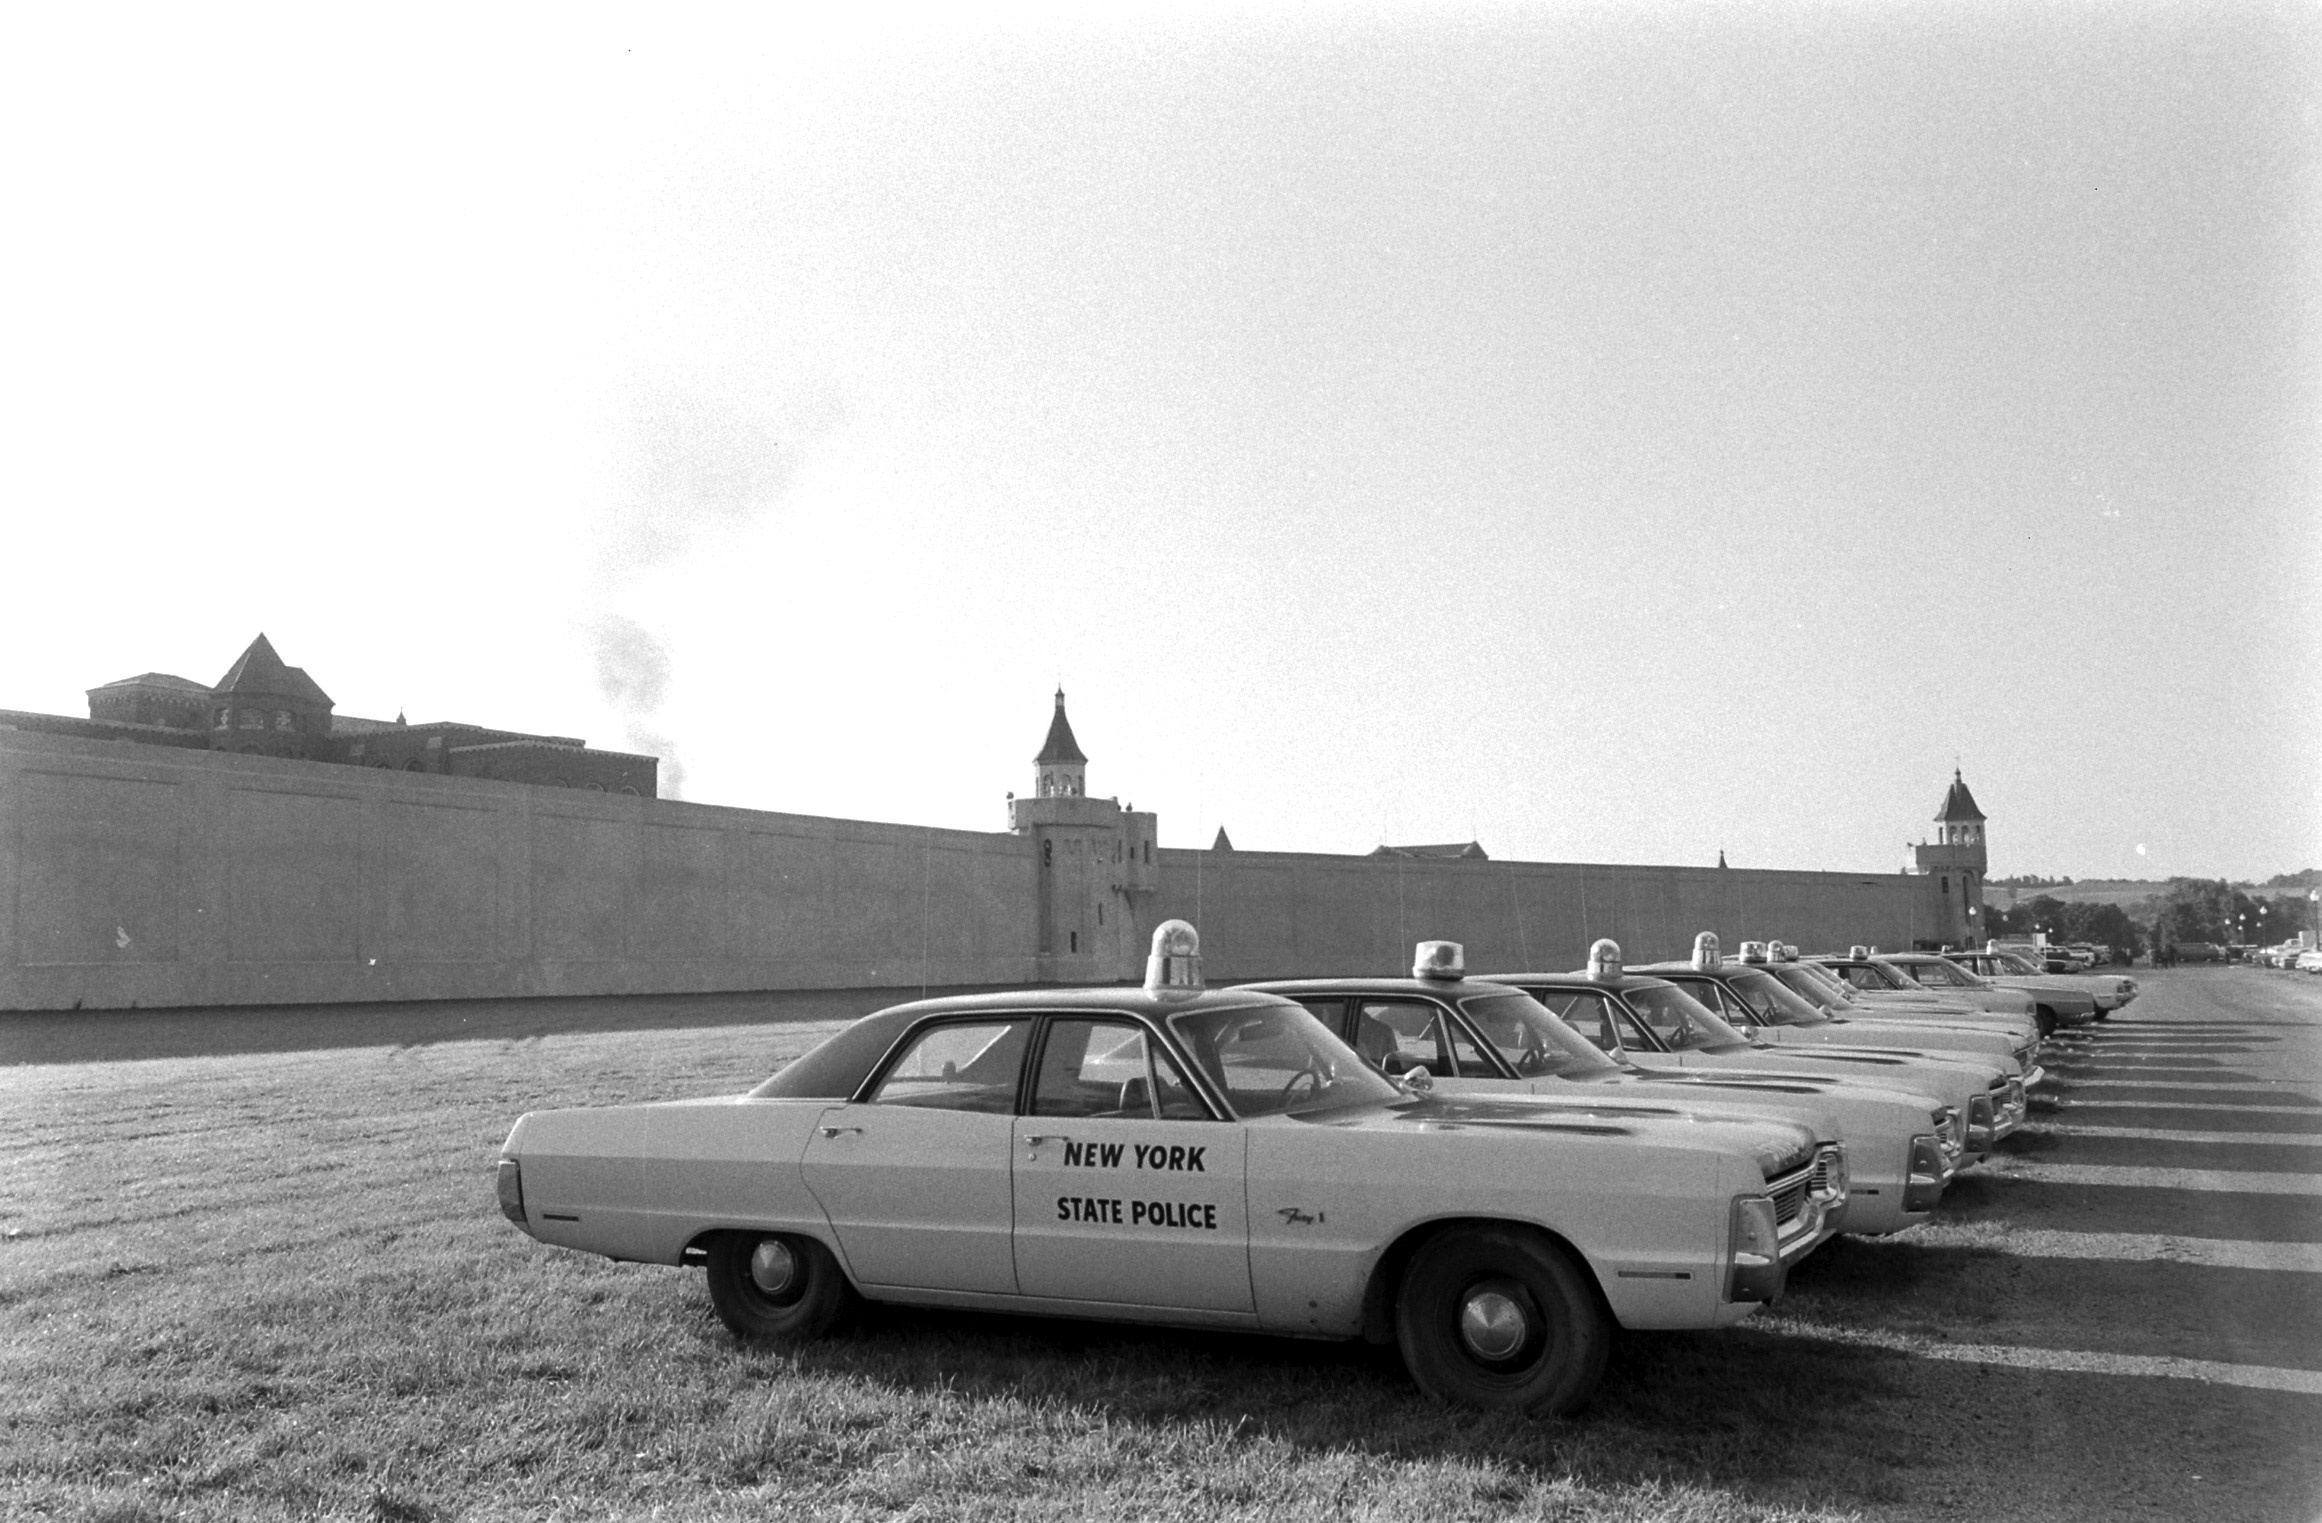 Scenes from the aftermath of the Attica Prison Riot, 1971